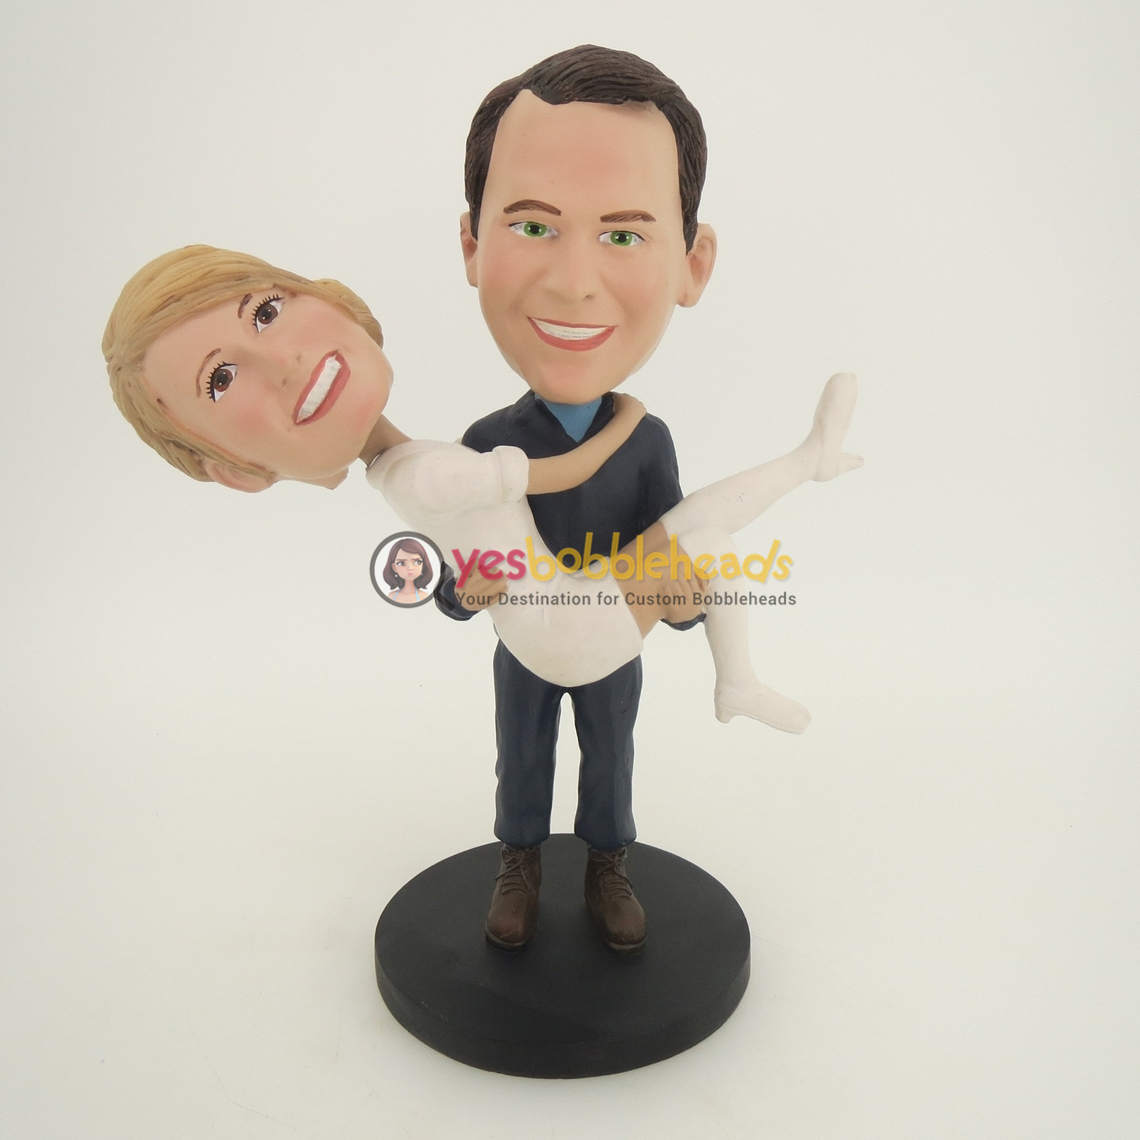 Picture of Custom Bobblehead Doll: Man Holding Woman